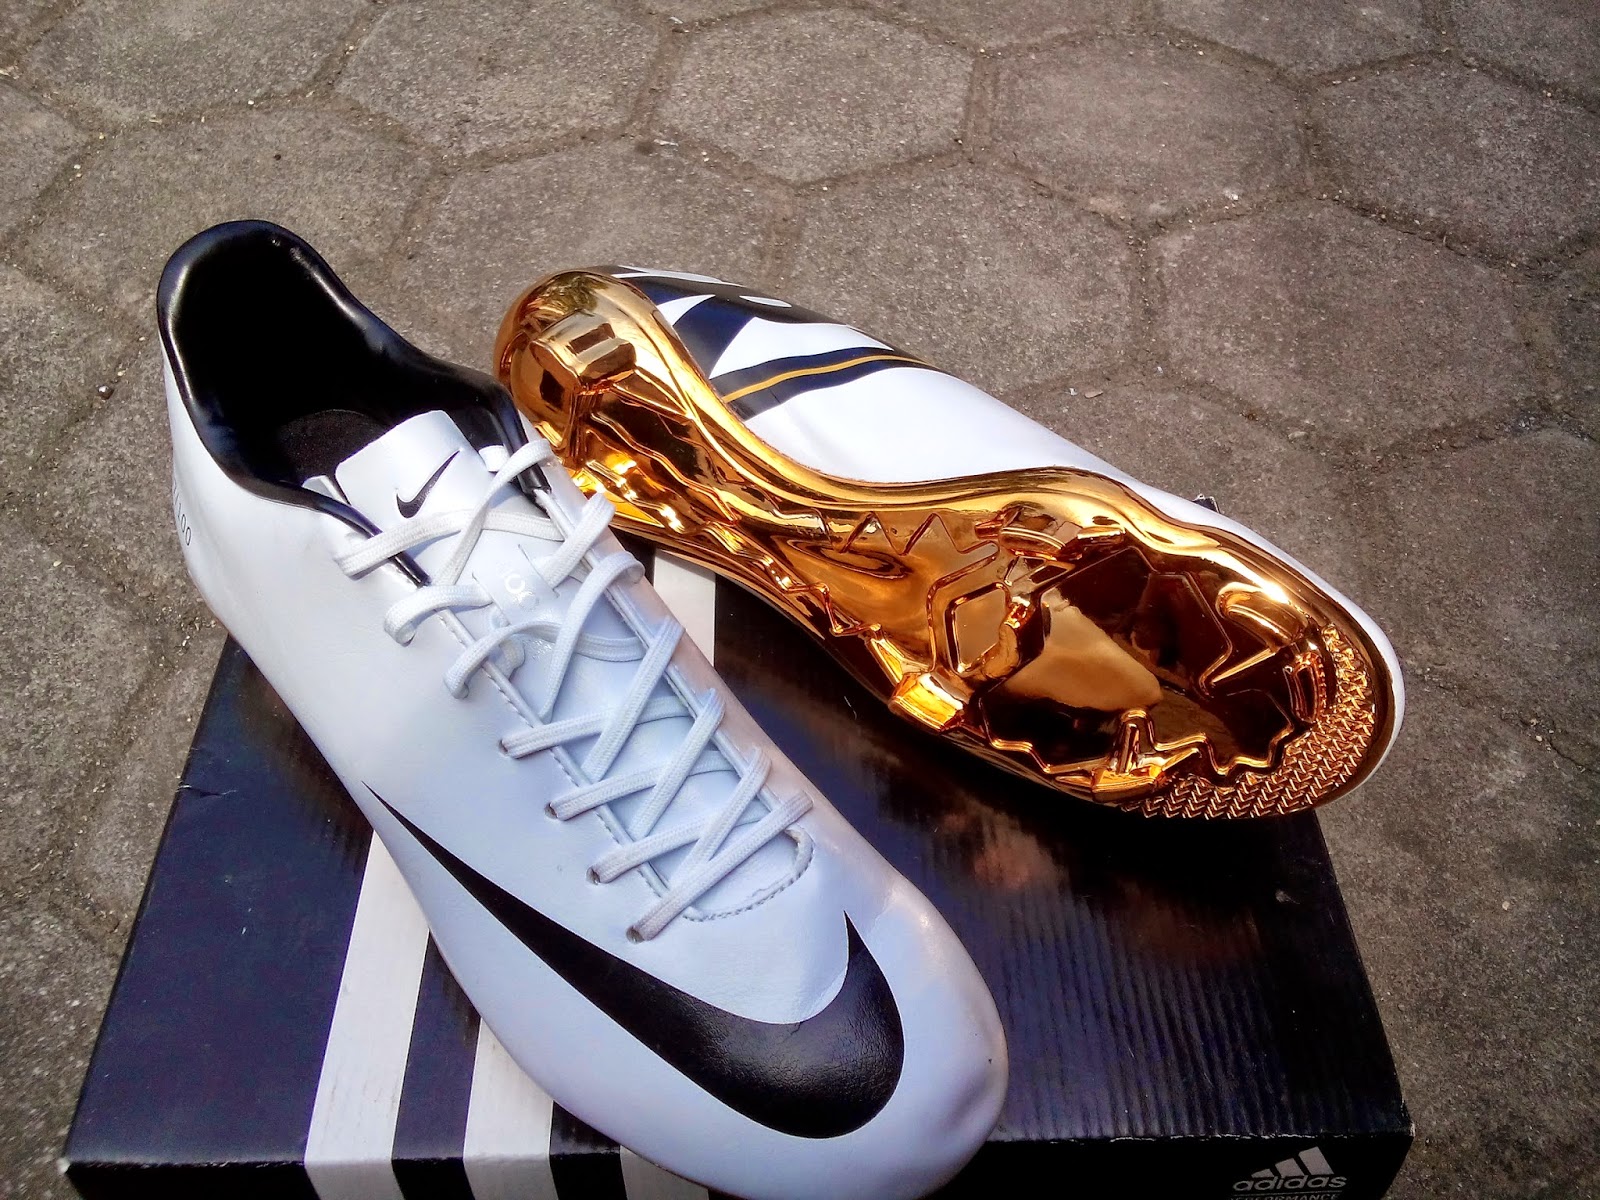 Price history for Nike Mercurial Vapor XII Academy CR7 TF